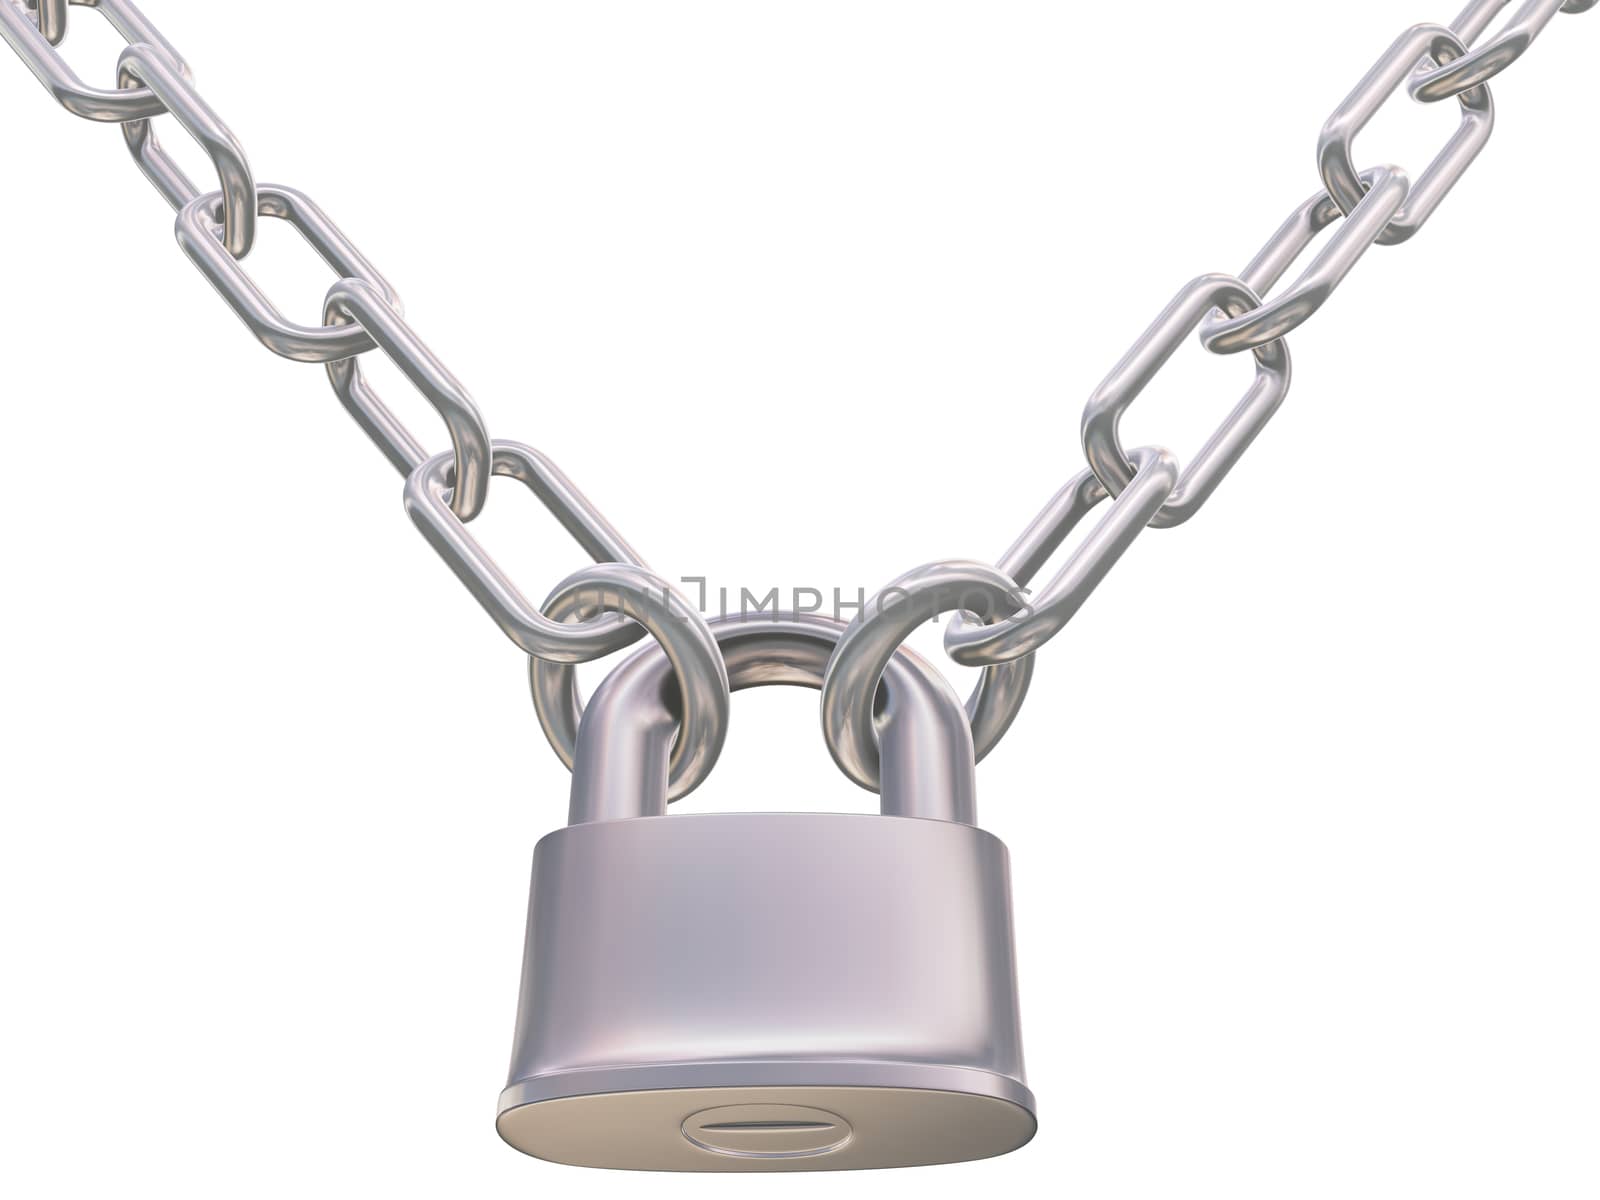 chains and padlock isolation on white background by Guru3D